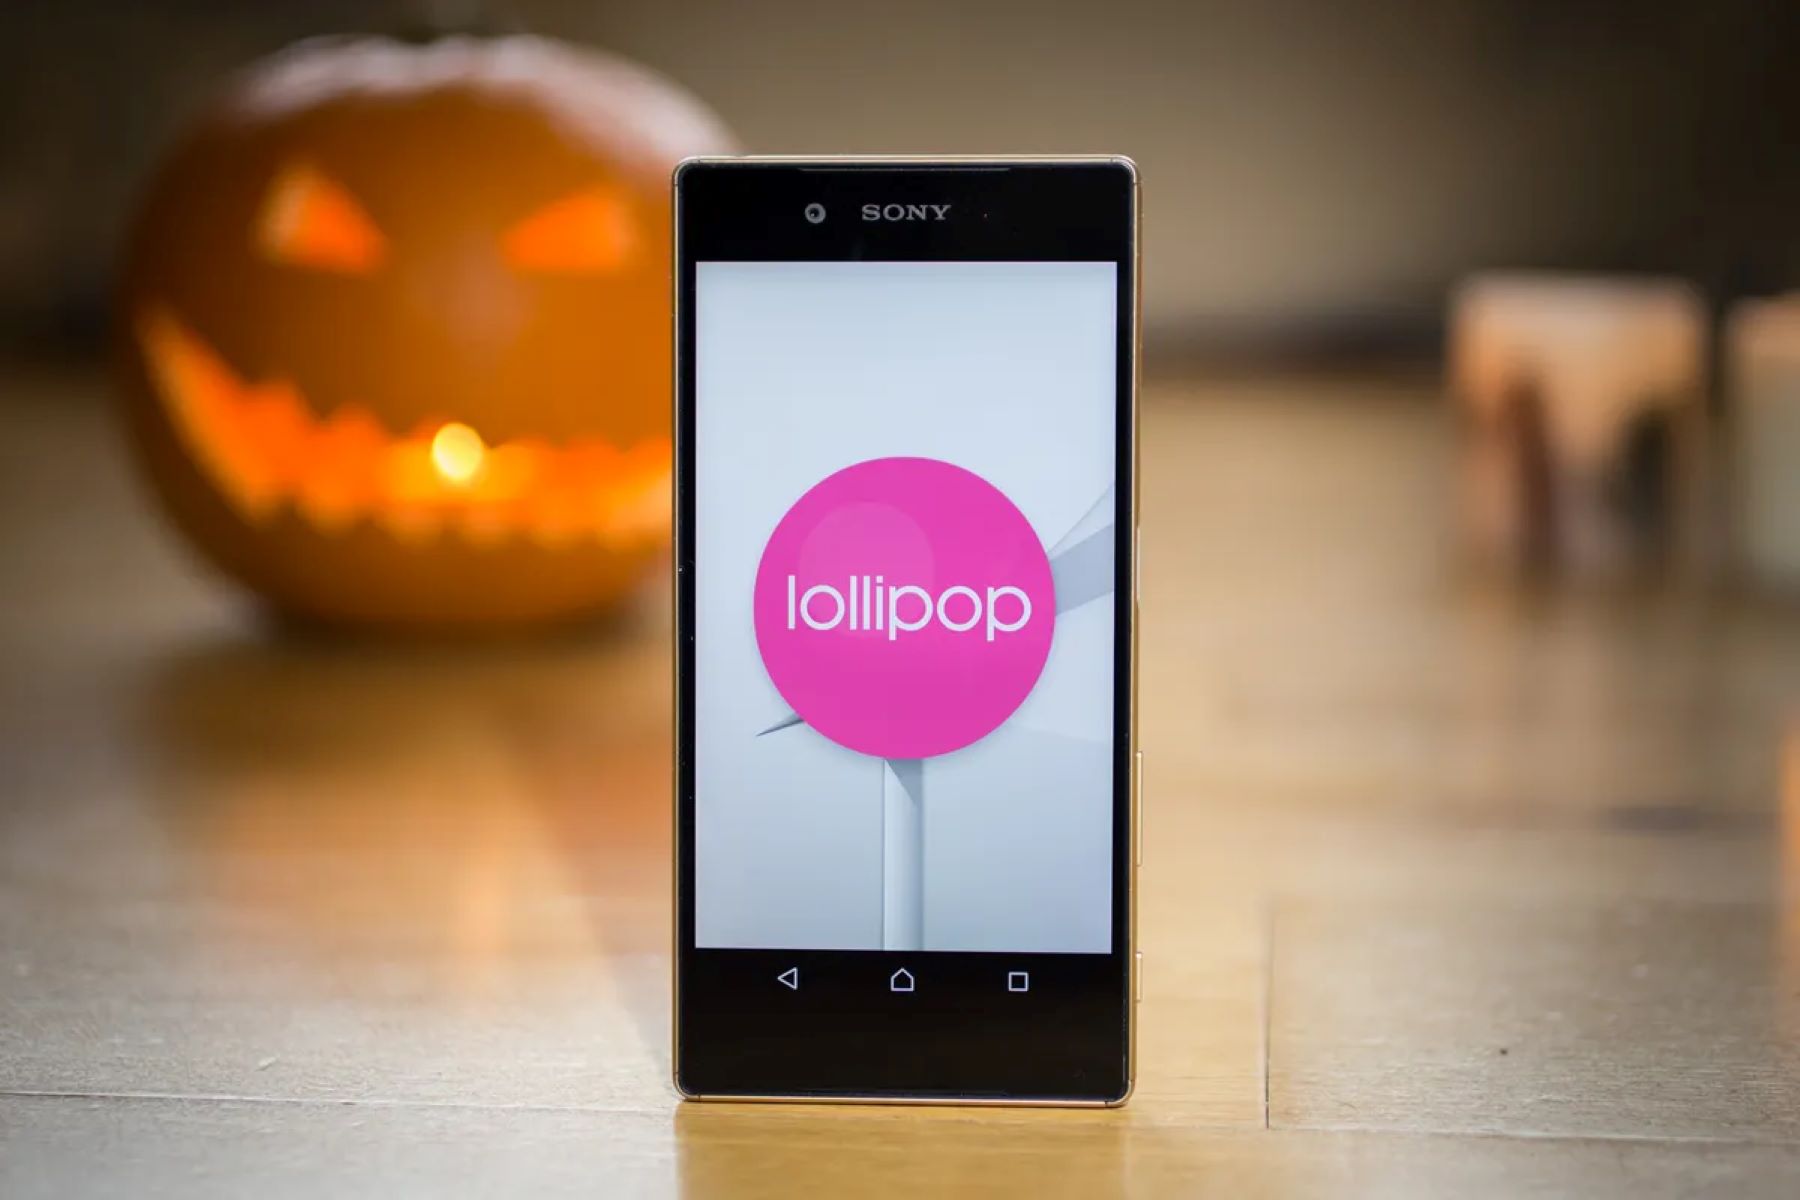 Xperia Z Lollipop Update: A Quick How-To Guide